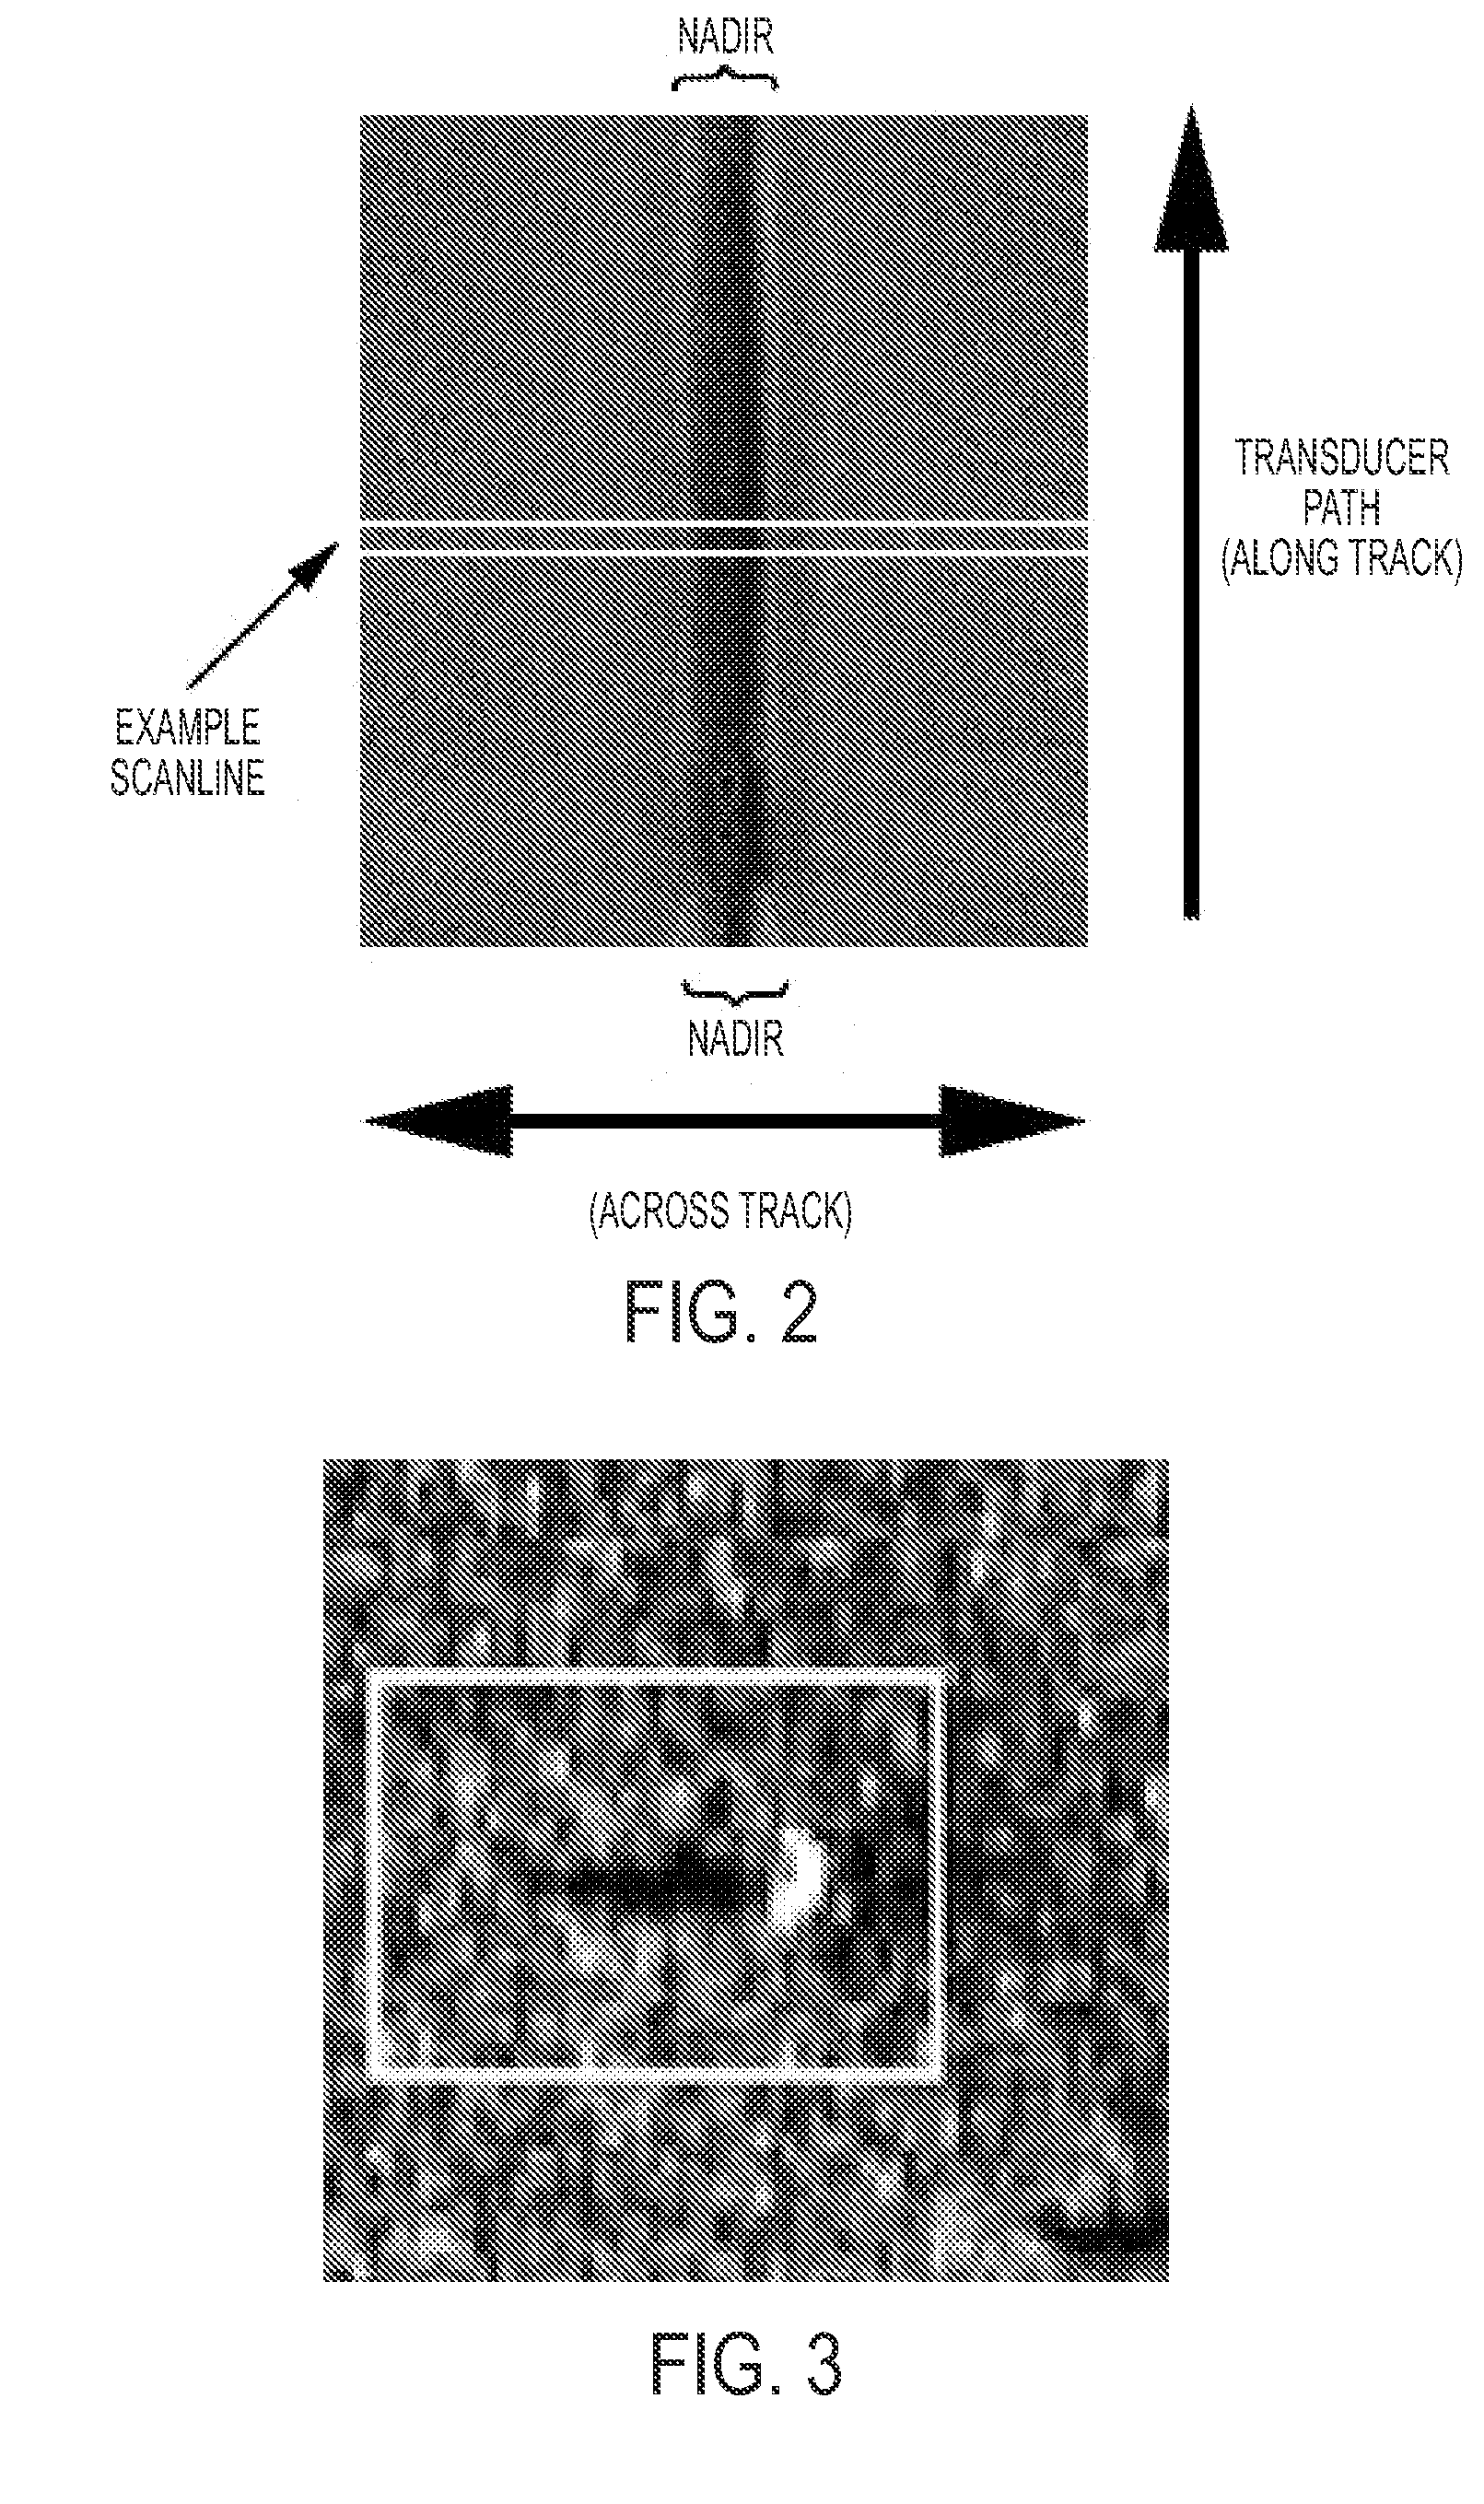 Method and System for Real-time Automated Change Detection and Classification for Images